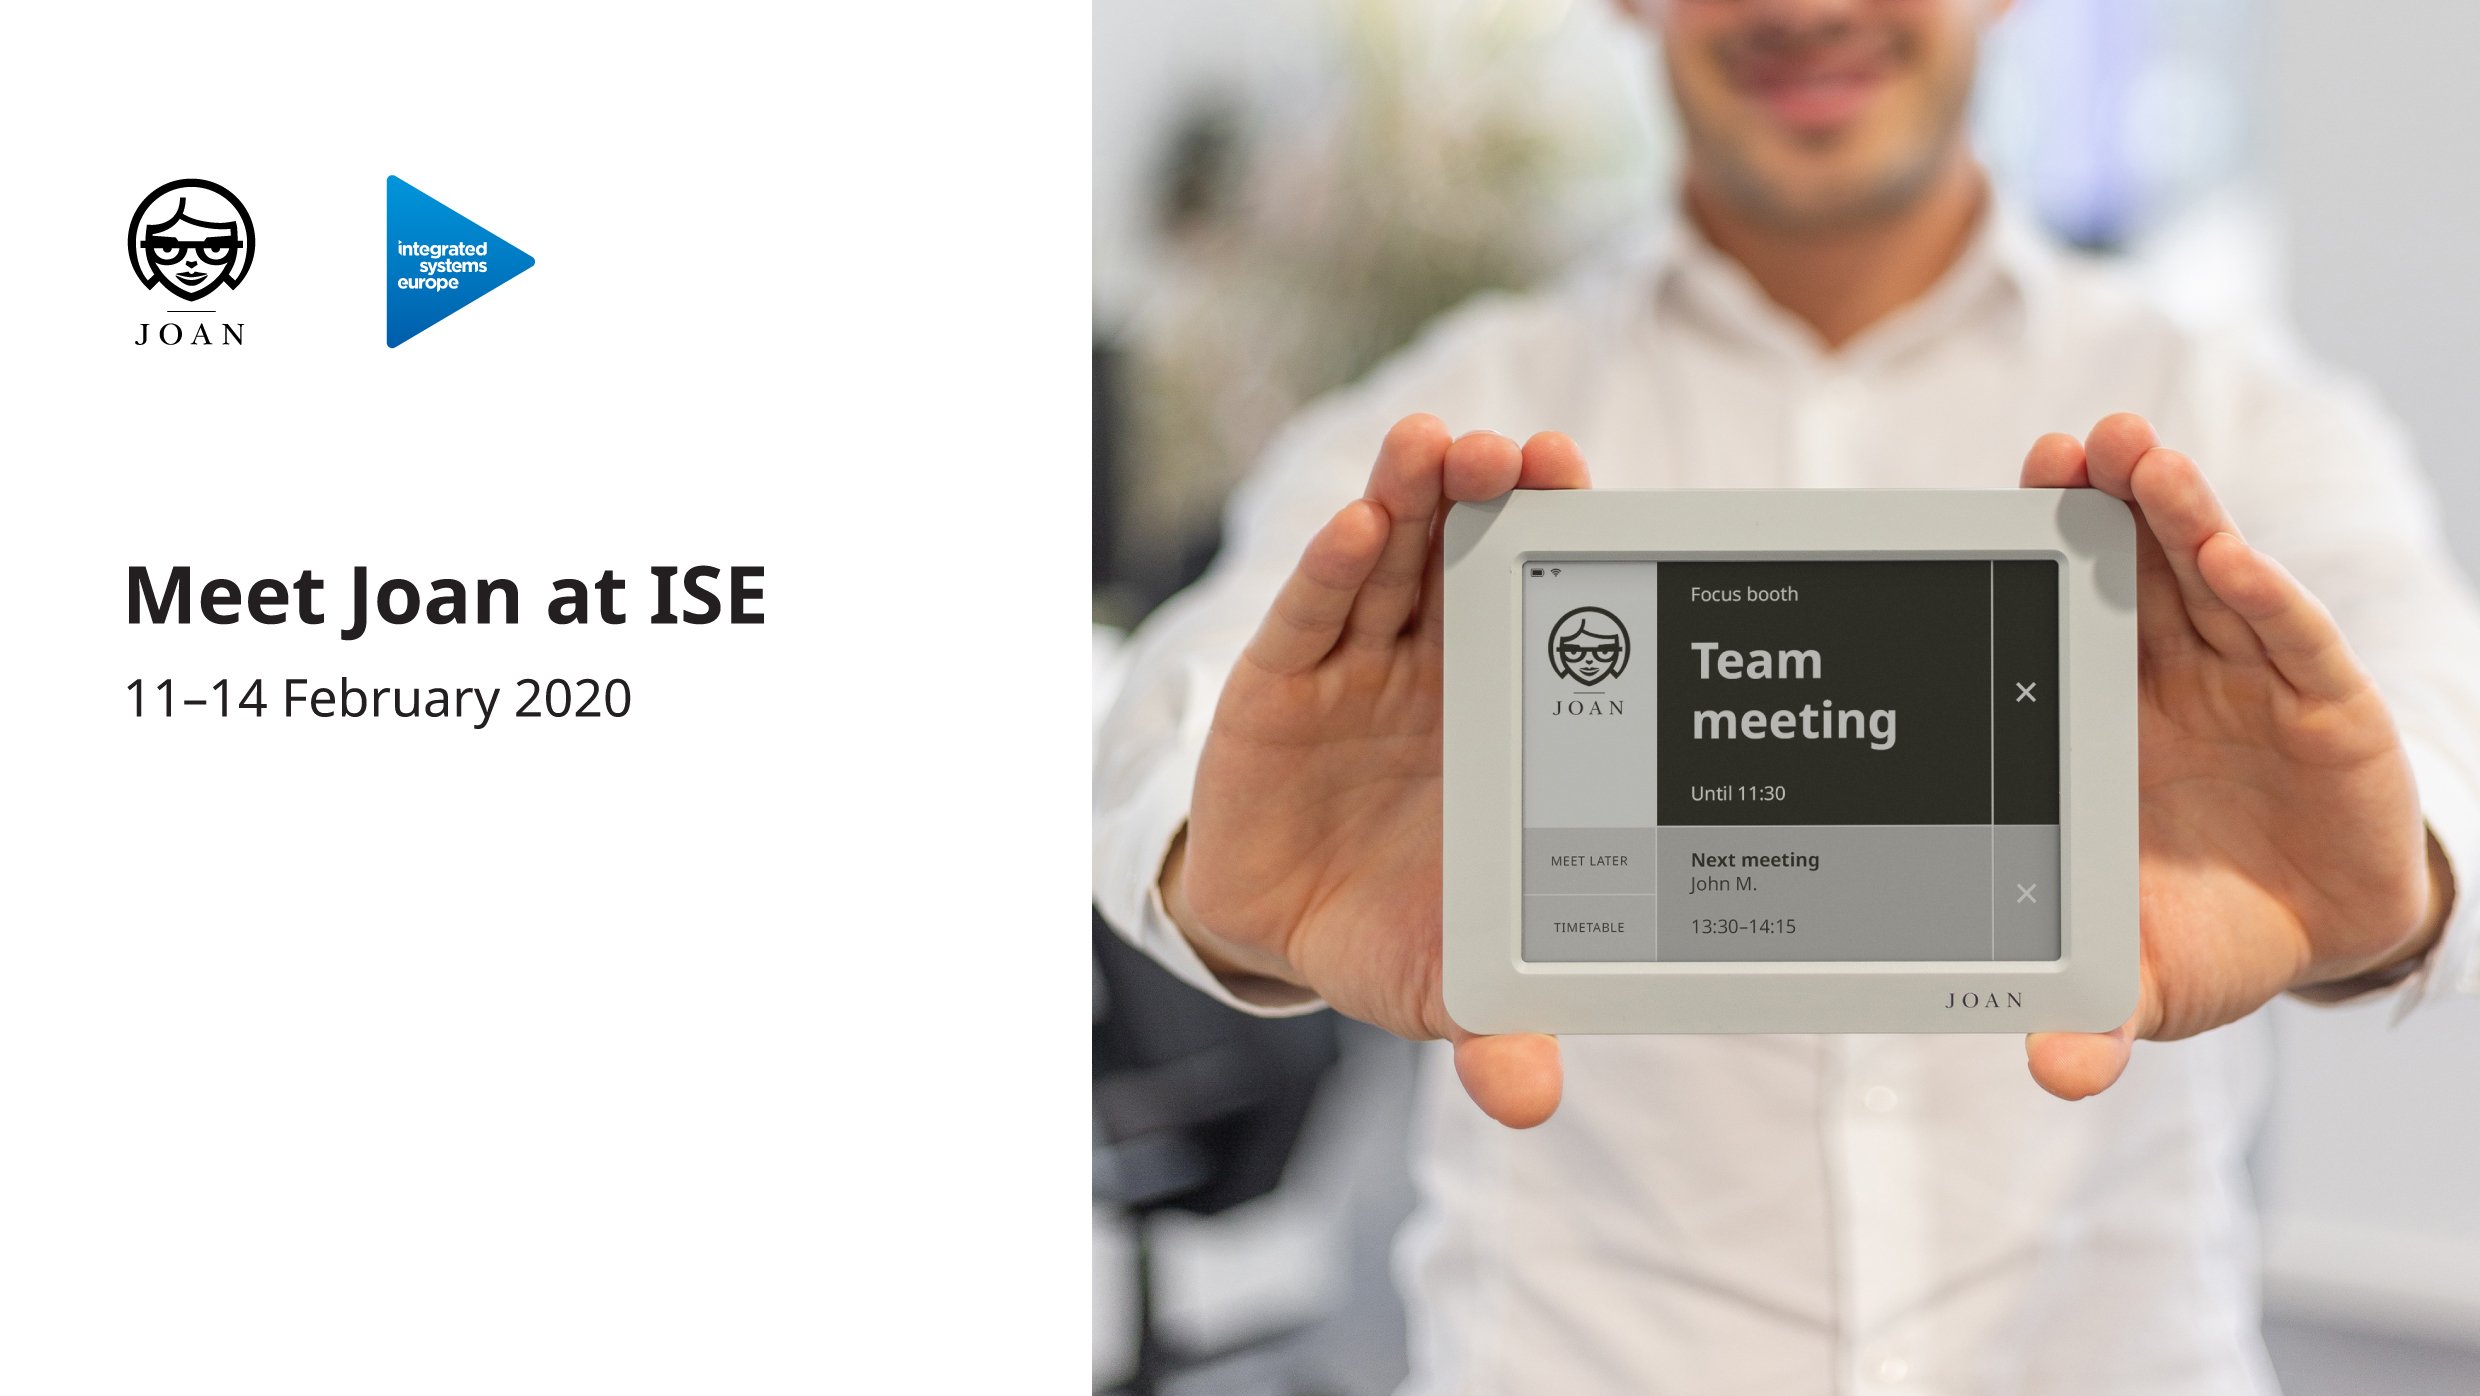 Are you ready to meet Joan at ISE 2020?